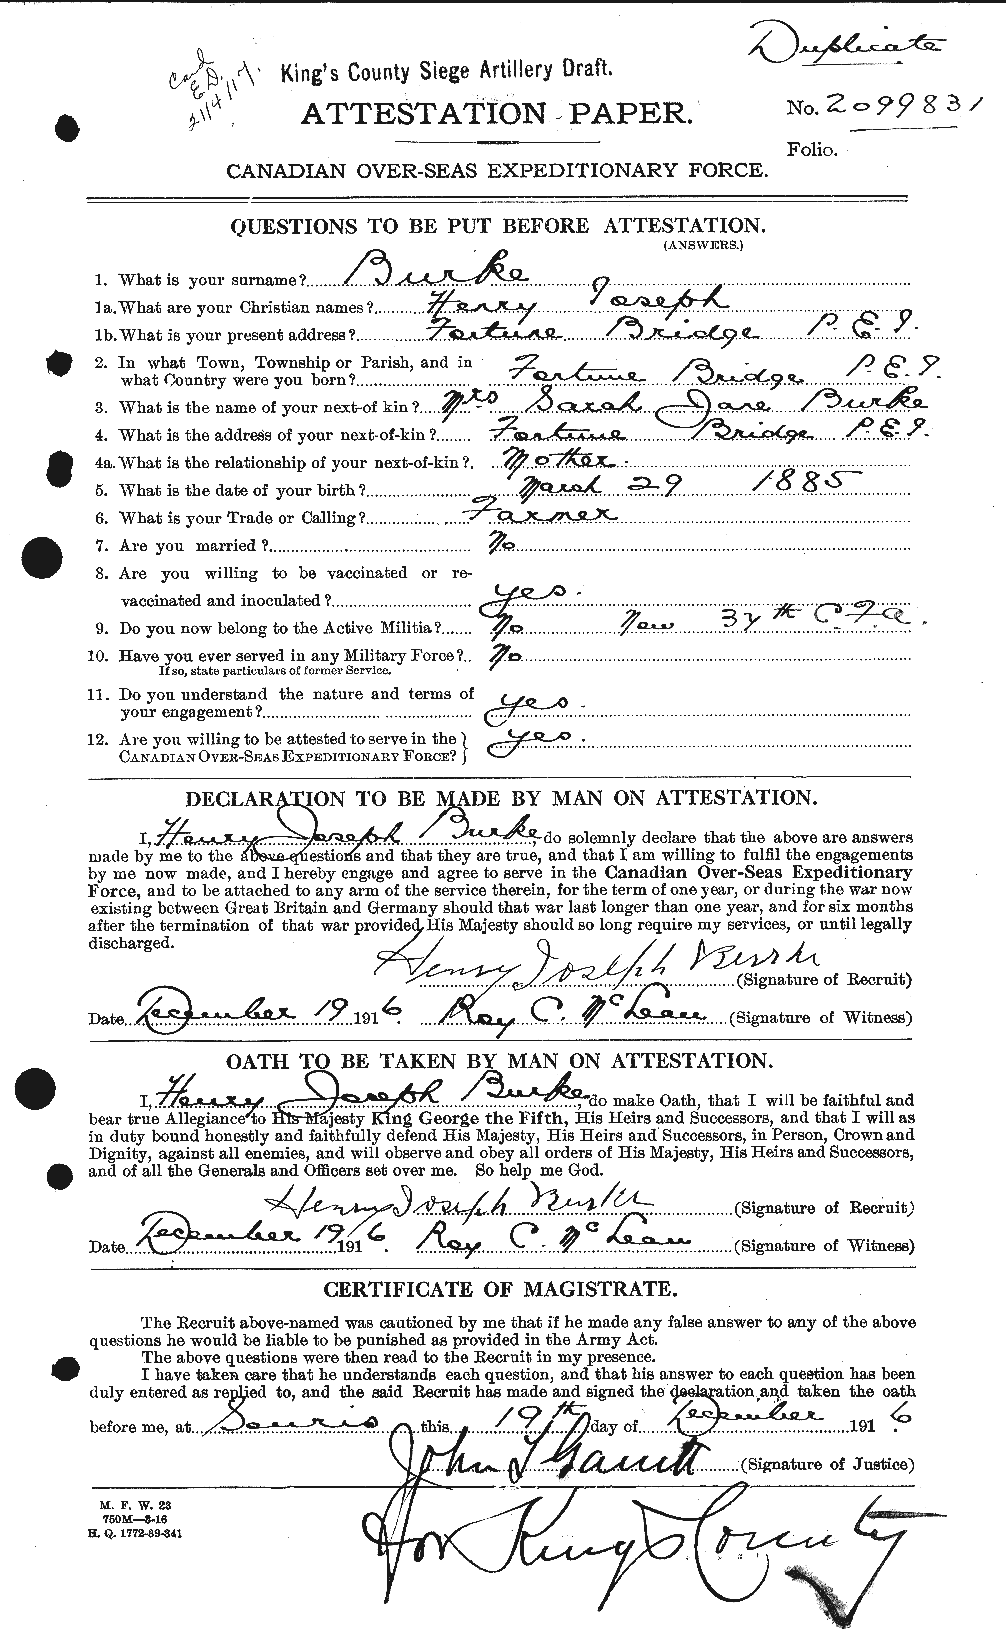 Personnel Records of the First World War - CEF 272892a